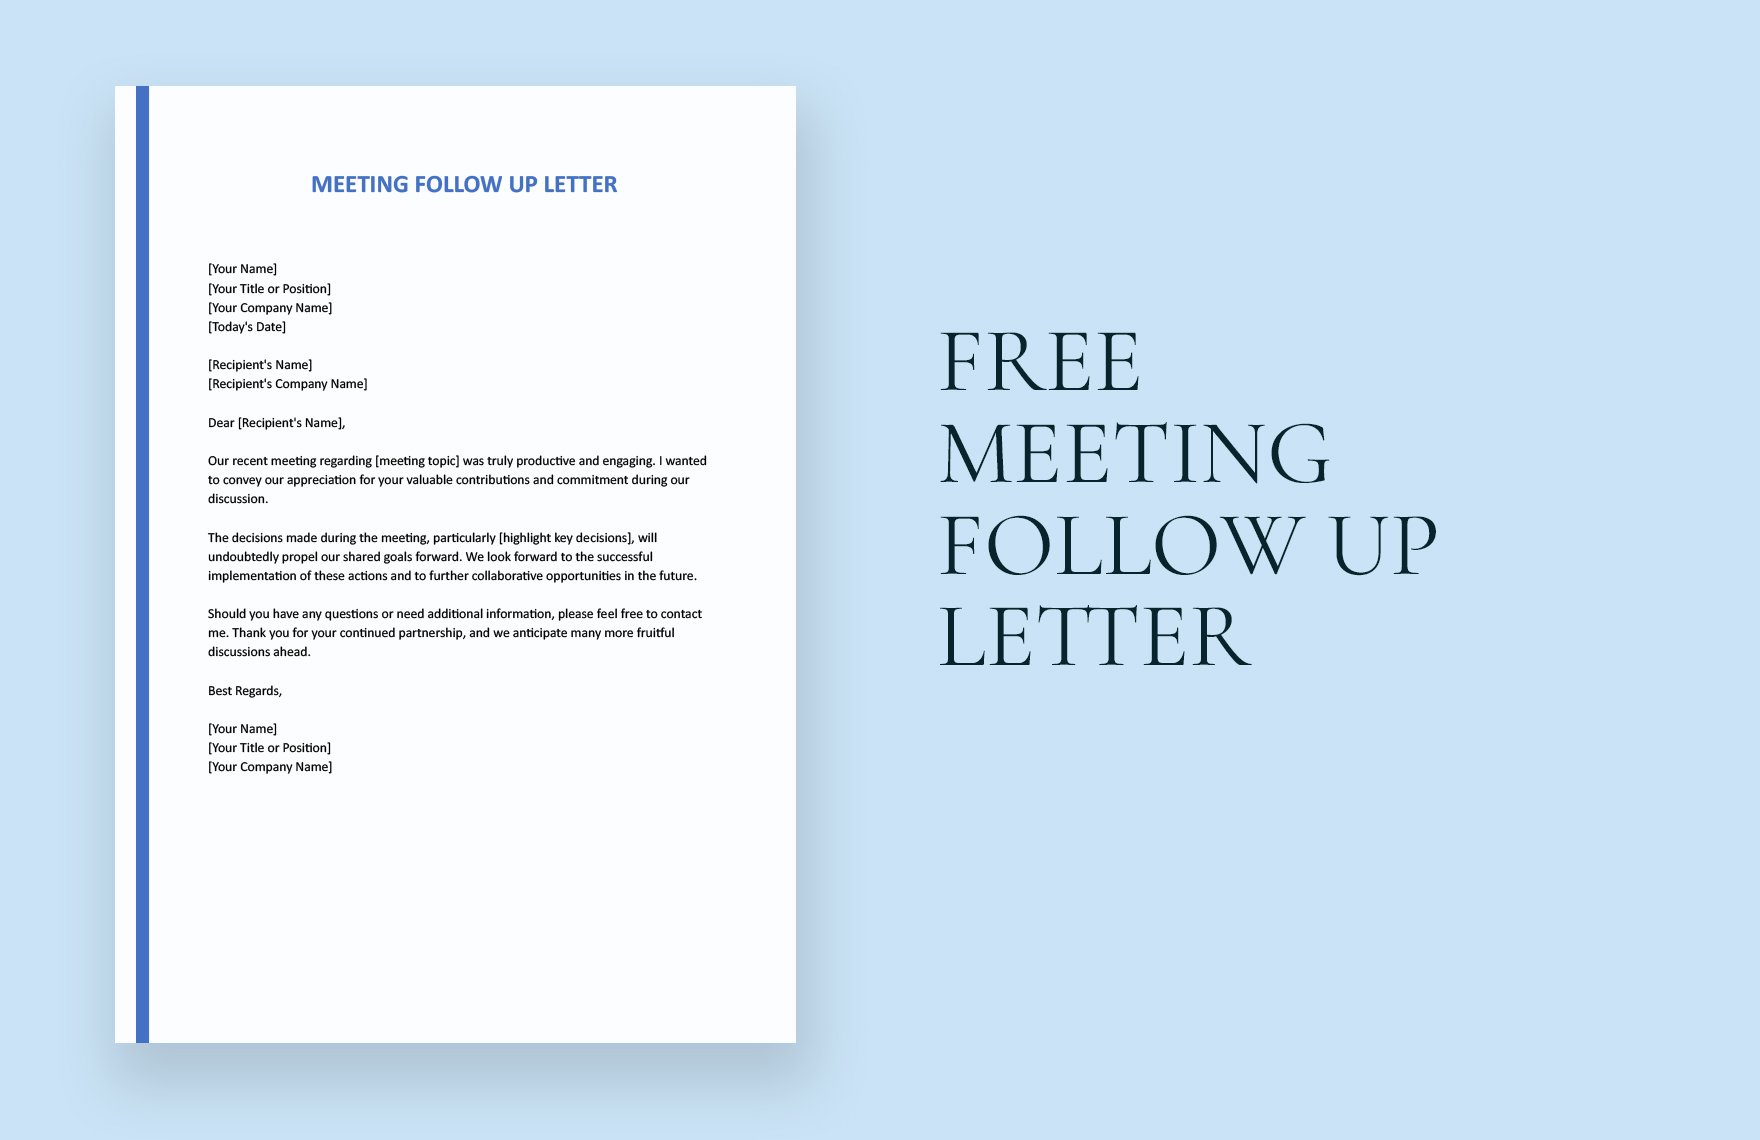 Meeting Follow Up Letter